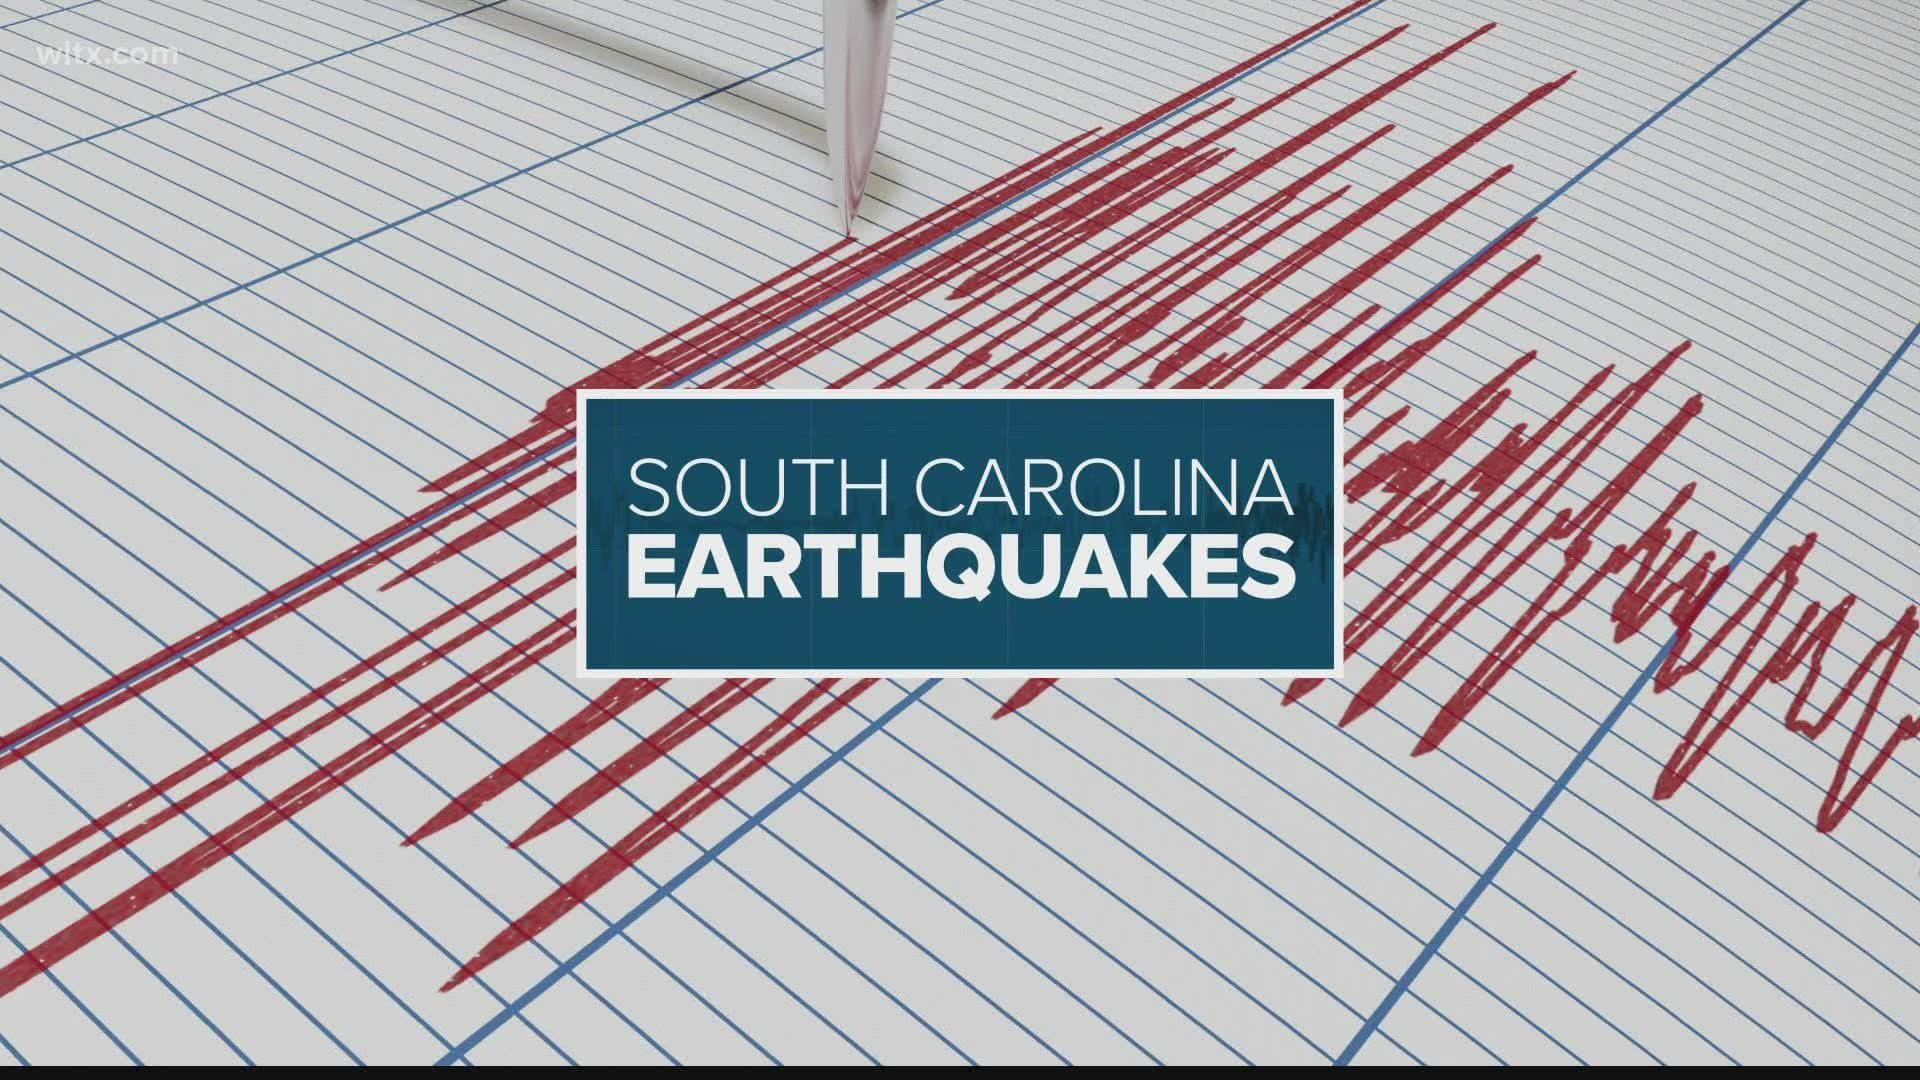 The quake was early Saturday morning continuing a procession of rumbles that began on Dec. 27.